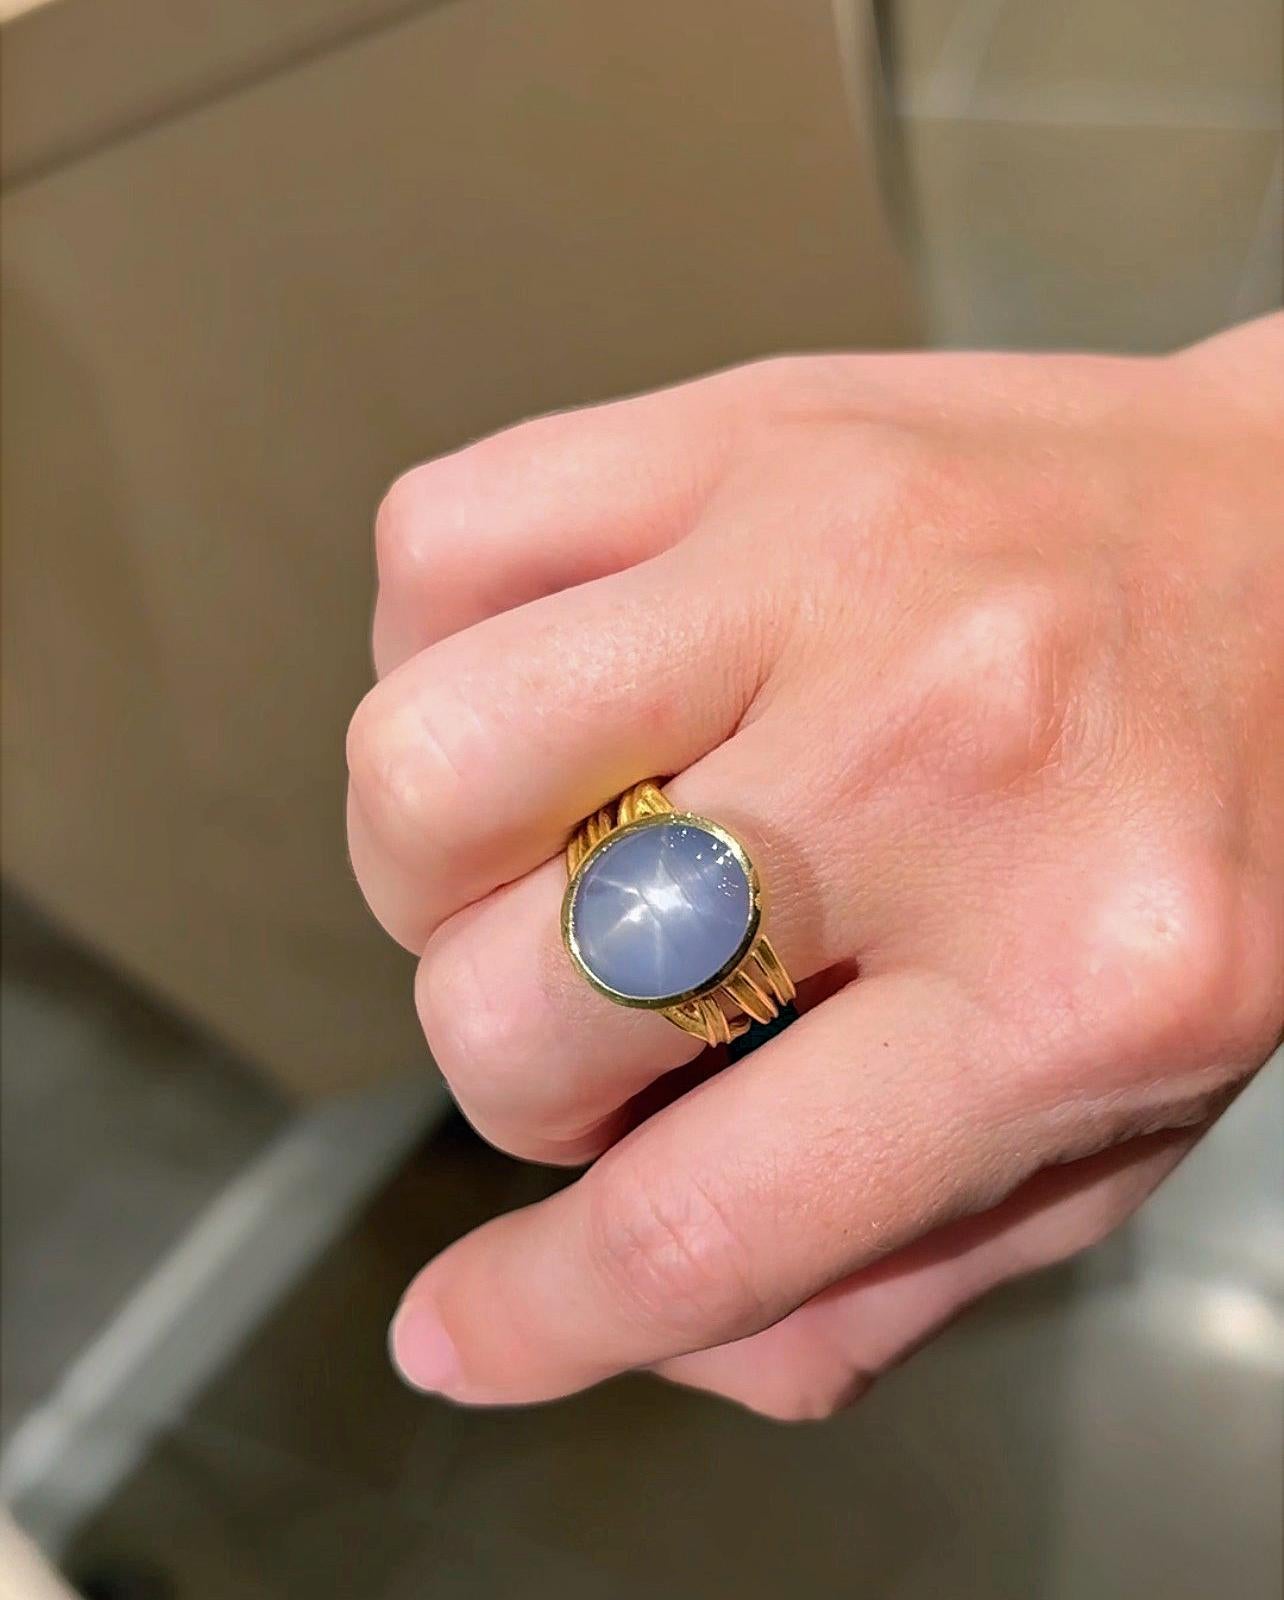 One of a Kind Ribbon Wrap Ring handmade by award-winning jewelry designer Barbara Heinrich featuring an extraordinary lavender blue 9.47 carat gem oval star sapphire cabochon with phenomenal asterism in the form of a six ray star, bezel-set in